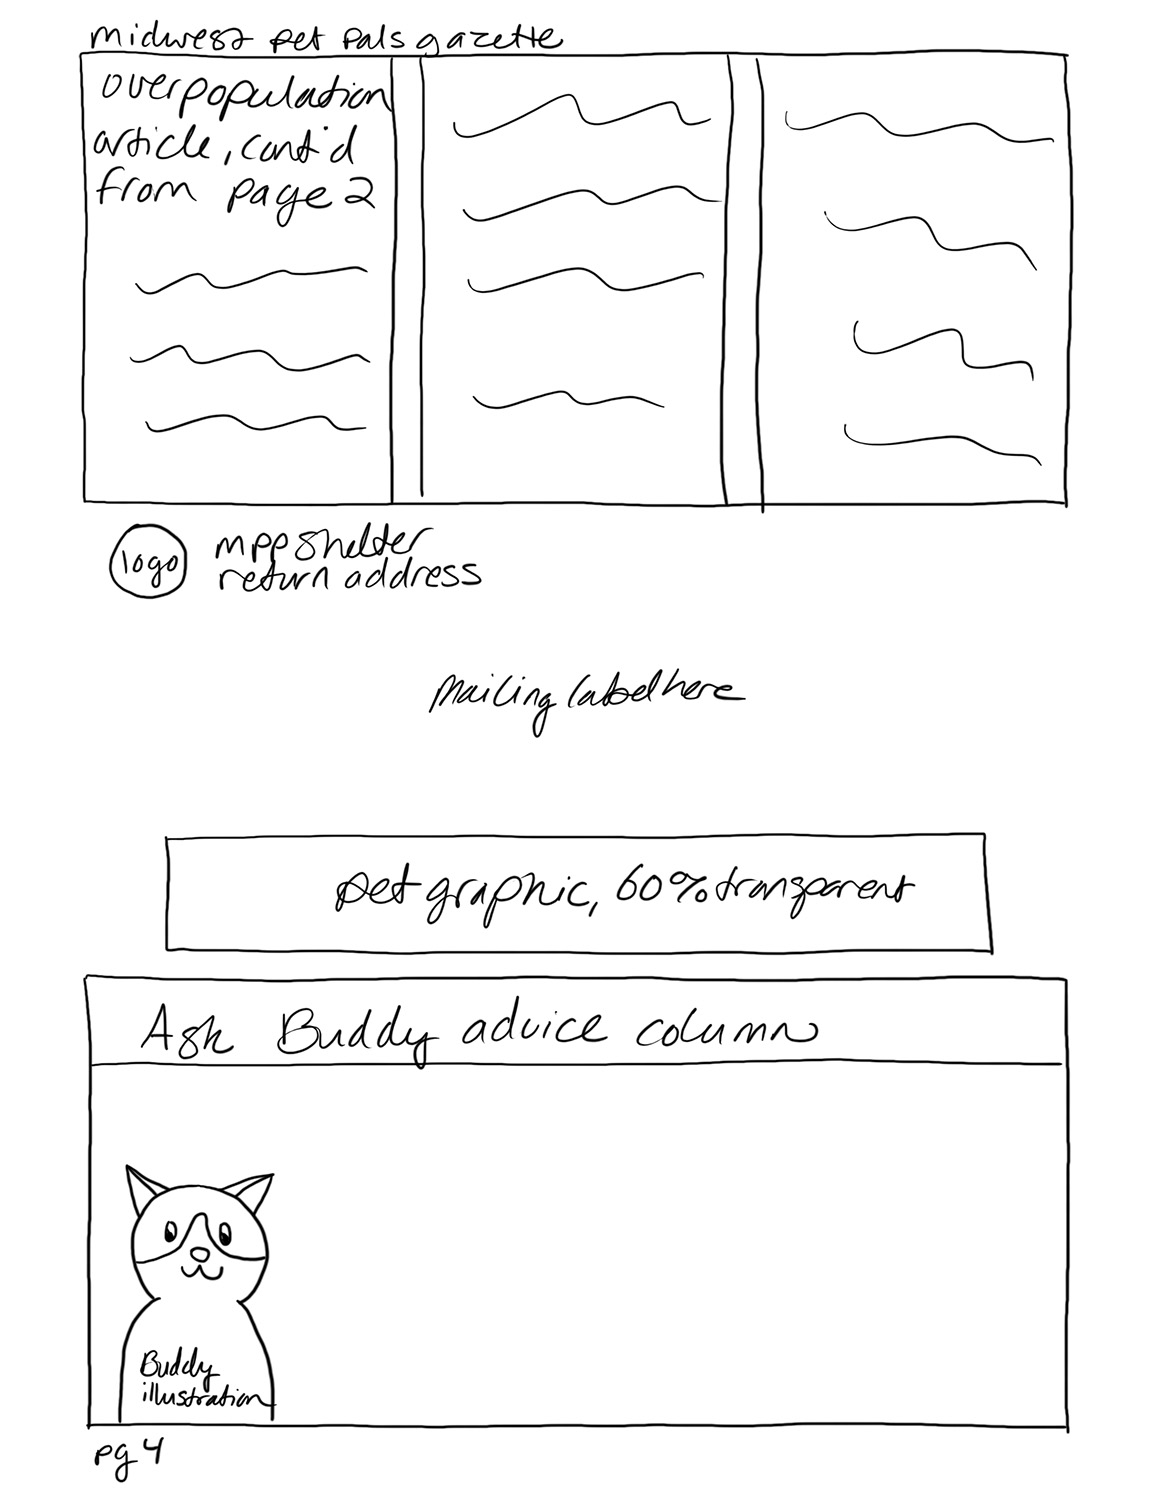 Rough sketch of page four of the newsletter. The top third of the page consists of the remainder of the main article, continued from page 2. The middle of the page holds mailing information, with a placeholder for a pet graphic that will be set to 60 percent transparency once added. The bottom third of the page consists of a sidebar article labeled 'Ask Buddy advice column', with a rough sketch of a cat labeled 'Buddy illustration'.